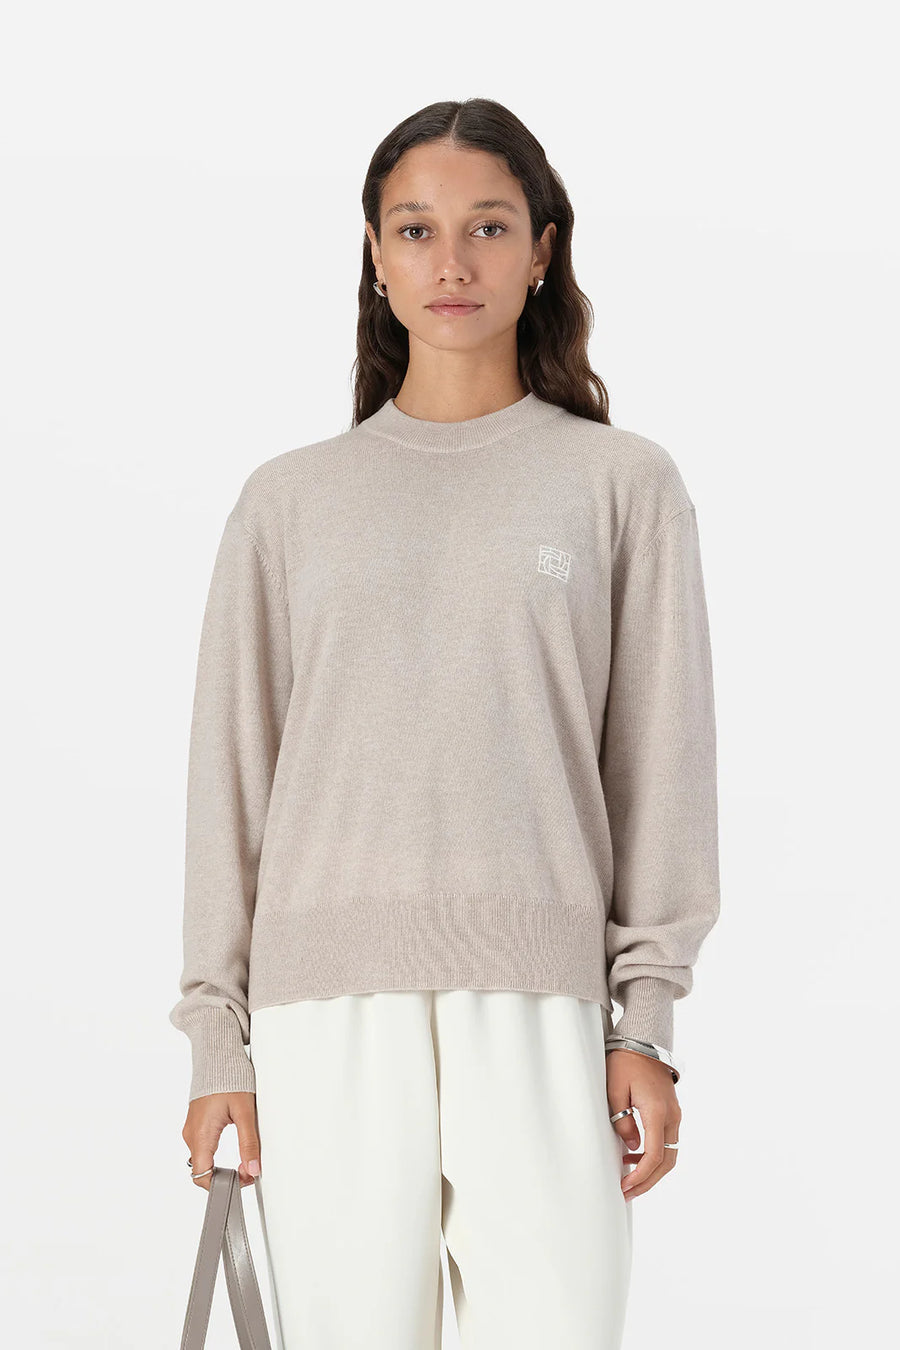 Elka Collective Mon Knit Oat Marle